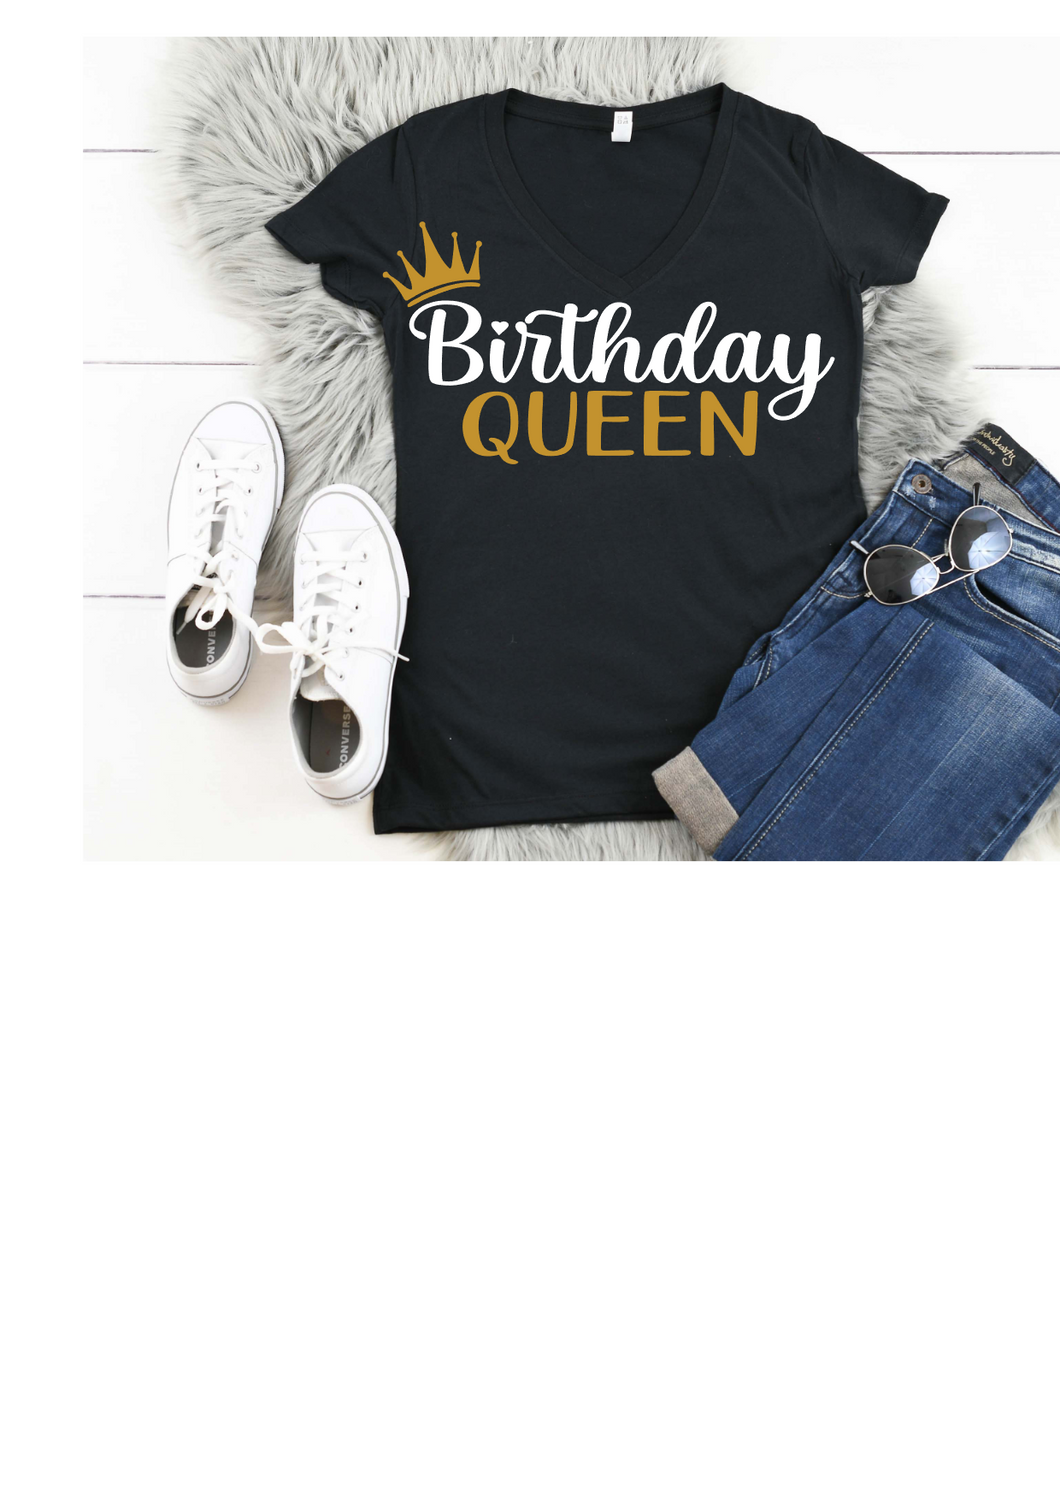 Birthday Queen Shirt with Crown